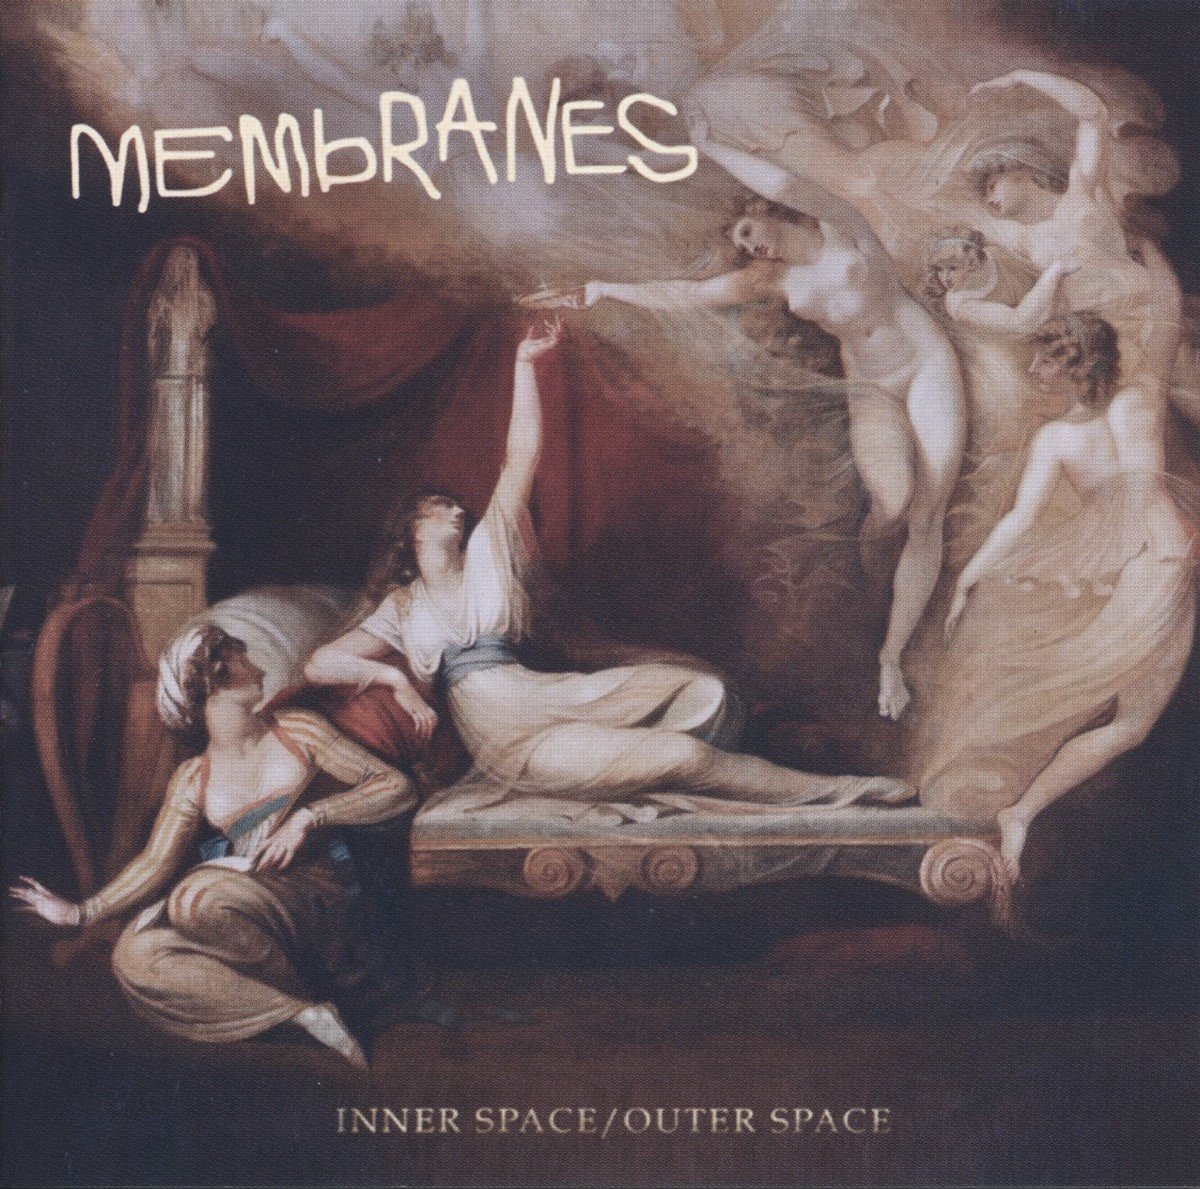 The Membranes - Inner Space/Outer Space (LP) - The Membranes